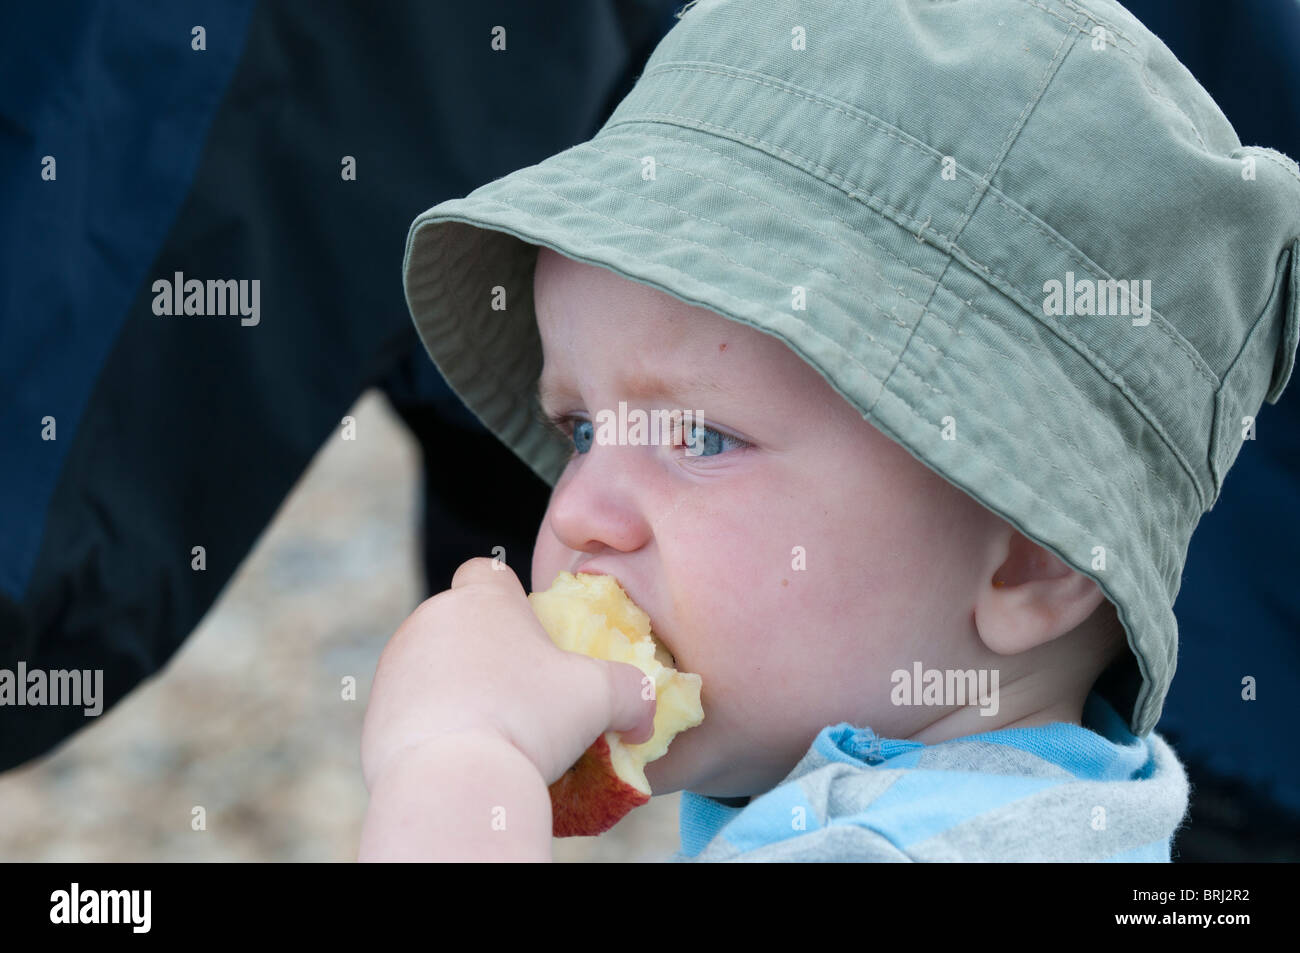 1 year old boy eating apple Stock Photo